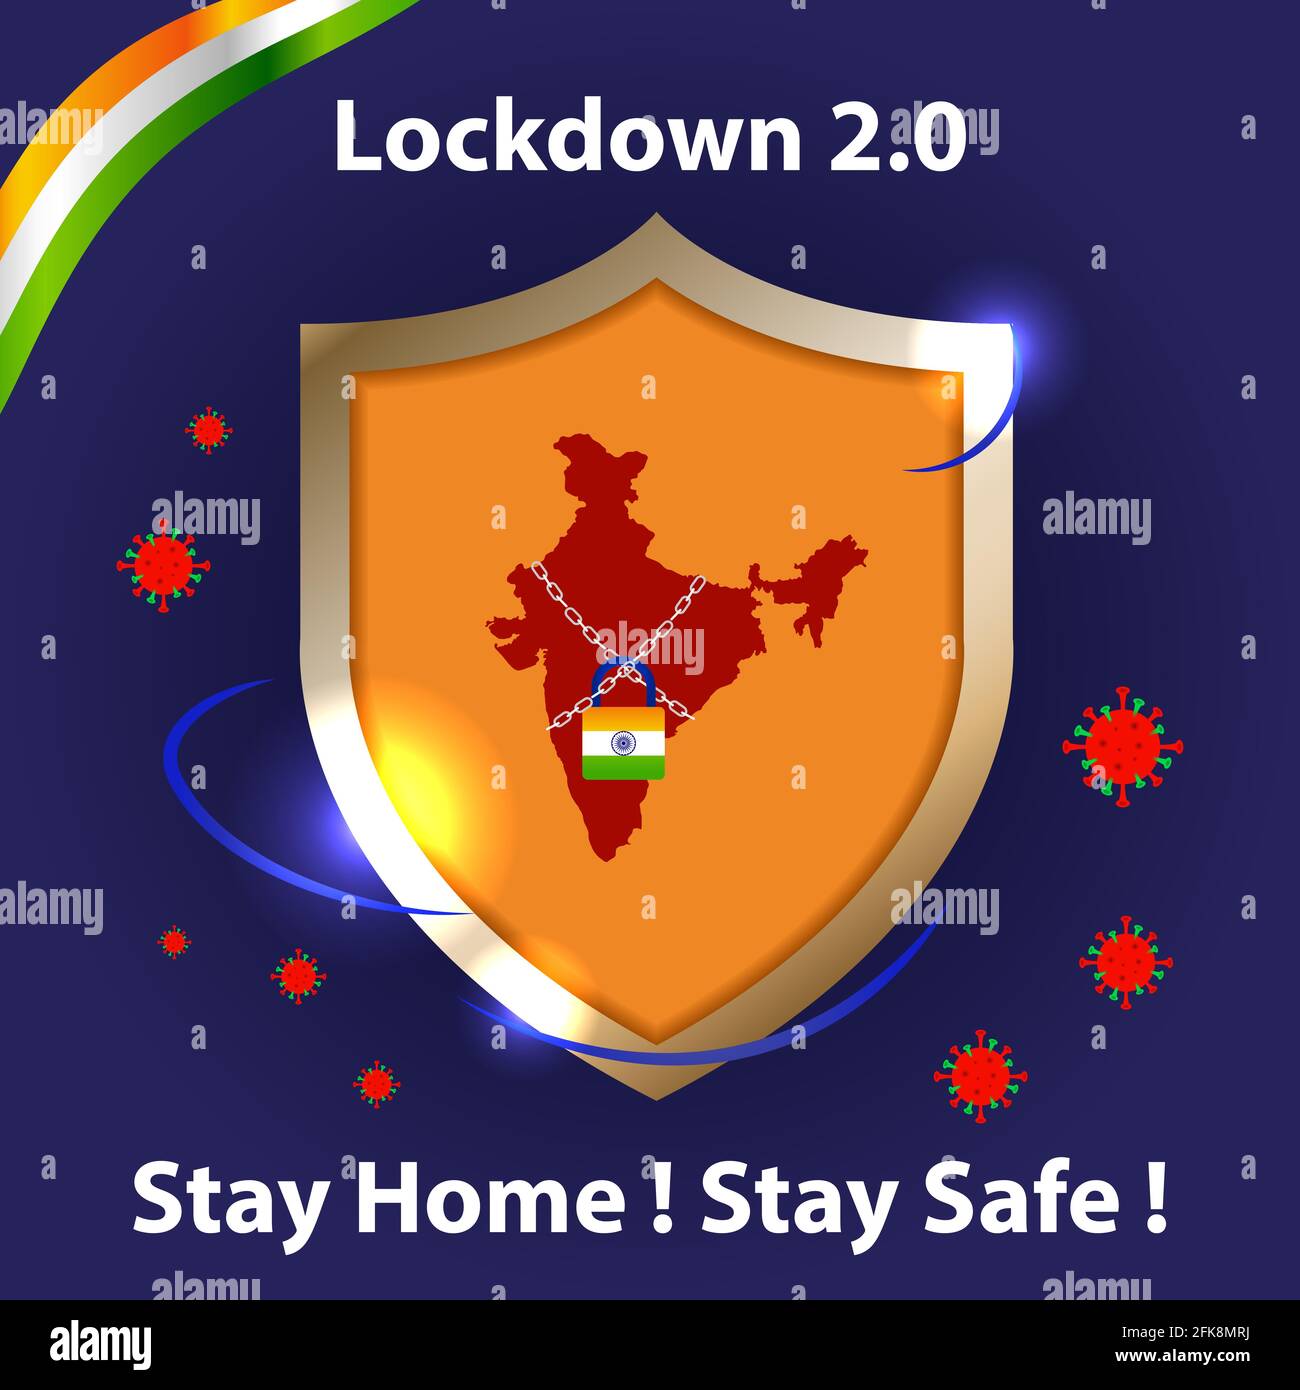 Lockdown new guidelines from government. Only essential supply allowed. Fight with covid-19. Save lives and Grow economy. Stay home stay safe india. Stock Vector